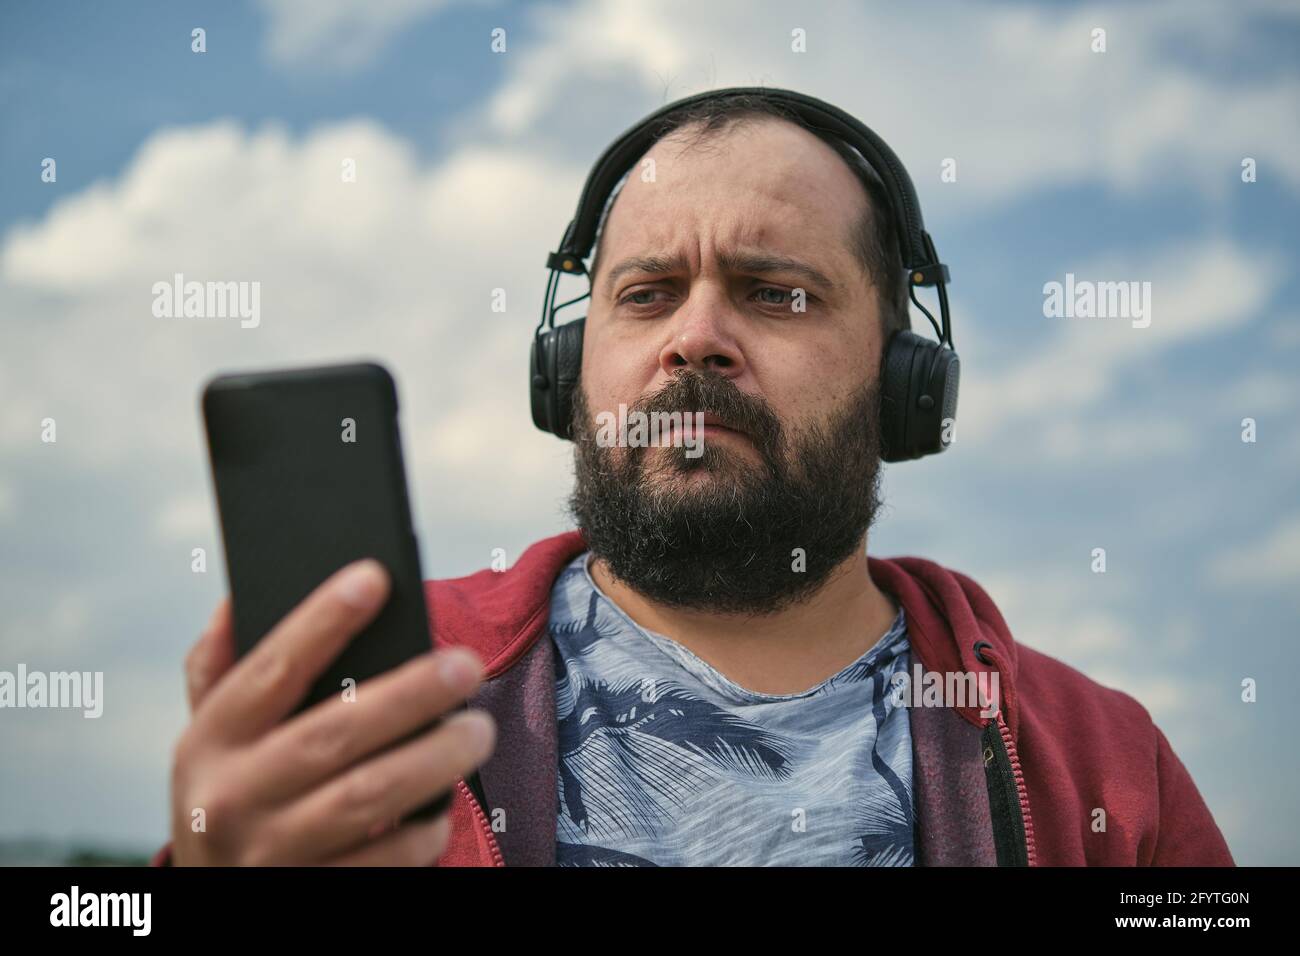 Middle-aged European man in headphones outdoors listening to music against the background of the sky, mobile phone in his hand Stock Photo